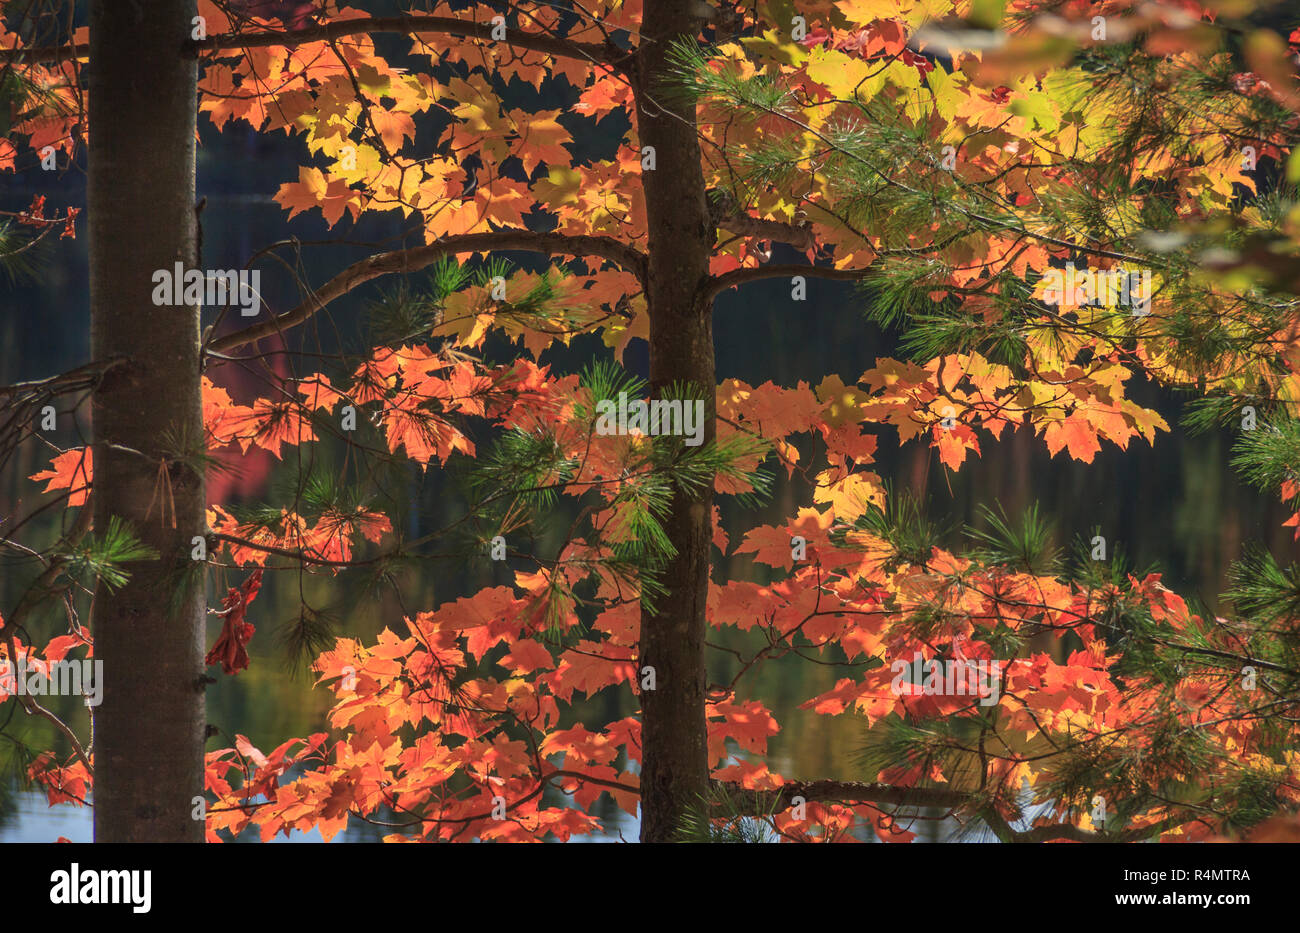 Closeup leaves on maple trees as they change color in autumn. Stock Photo